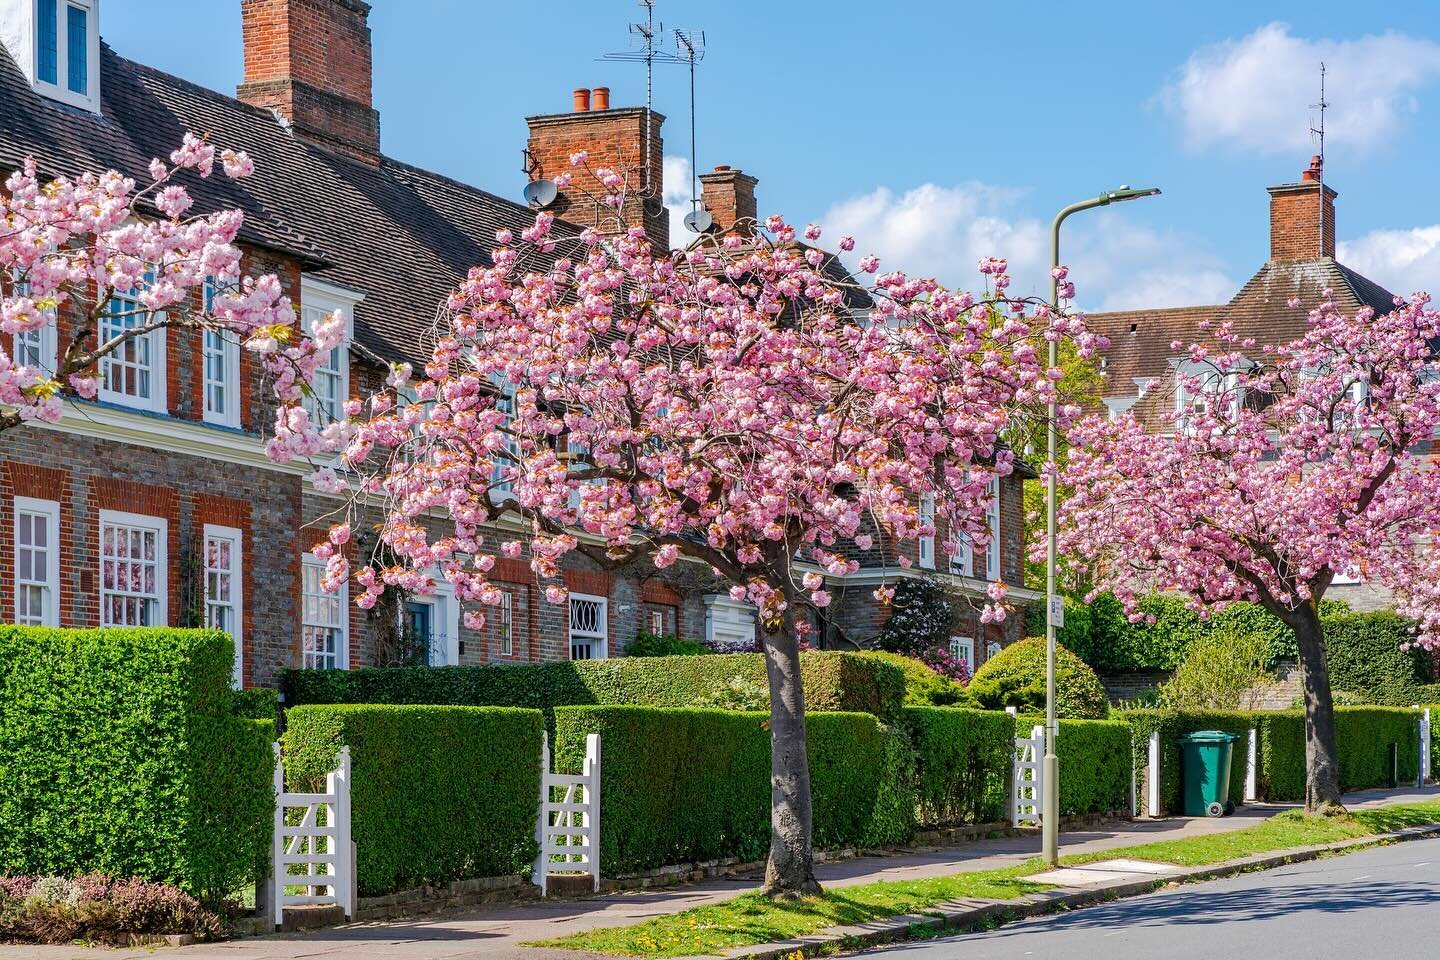 After the winter, many people see spring as an ideal time to launch their property to the market - driven by the longer days, warmer weather (hopefully!) and blossoming flowers.

We are already starting to hear about off-market properties which are q